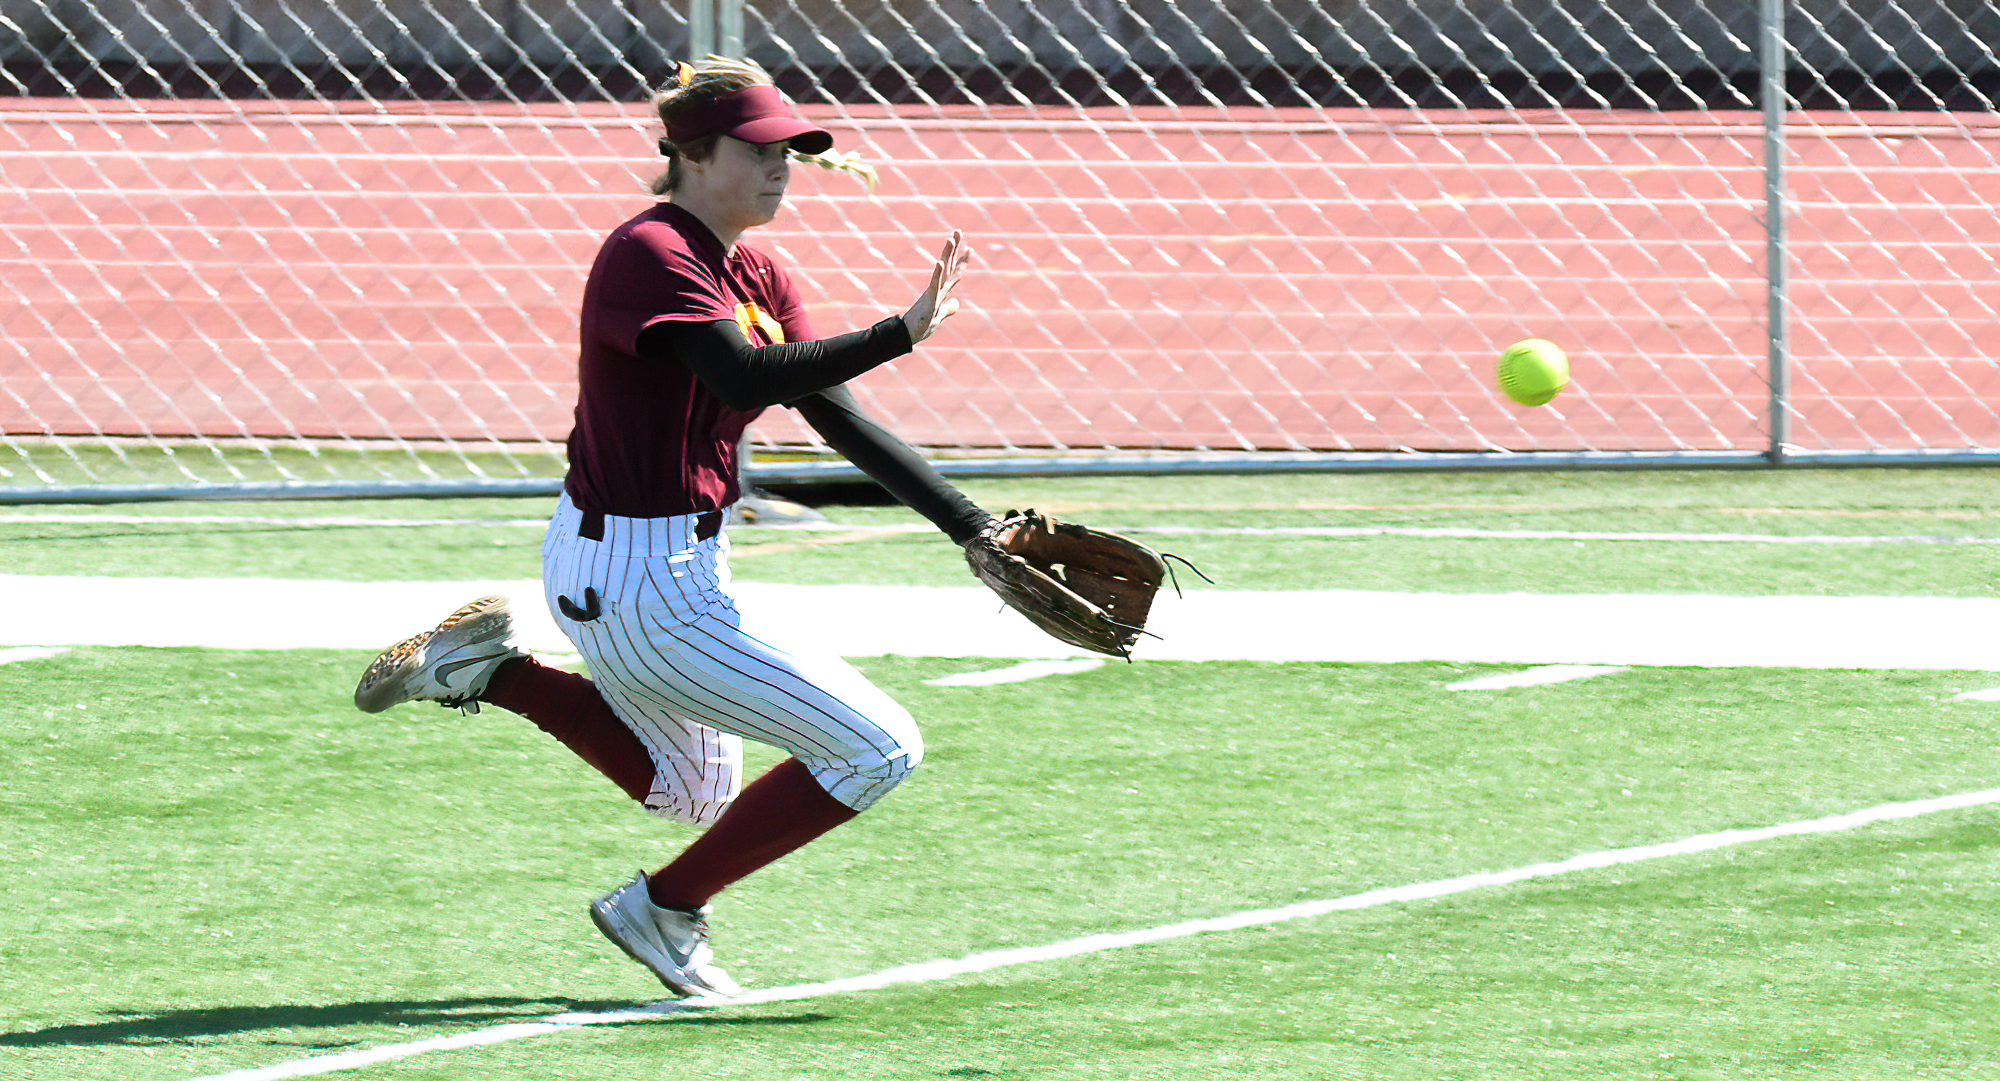 Sophomore Landry Maragos tracks down a ball in center field during the Cobbers' doubleheader with St. Olaf.